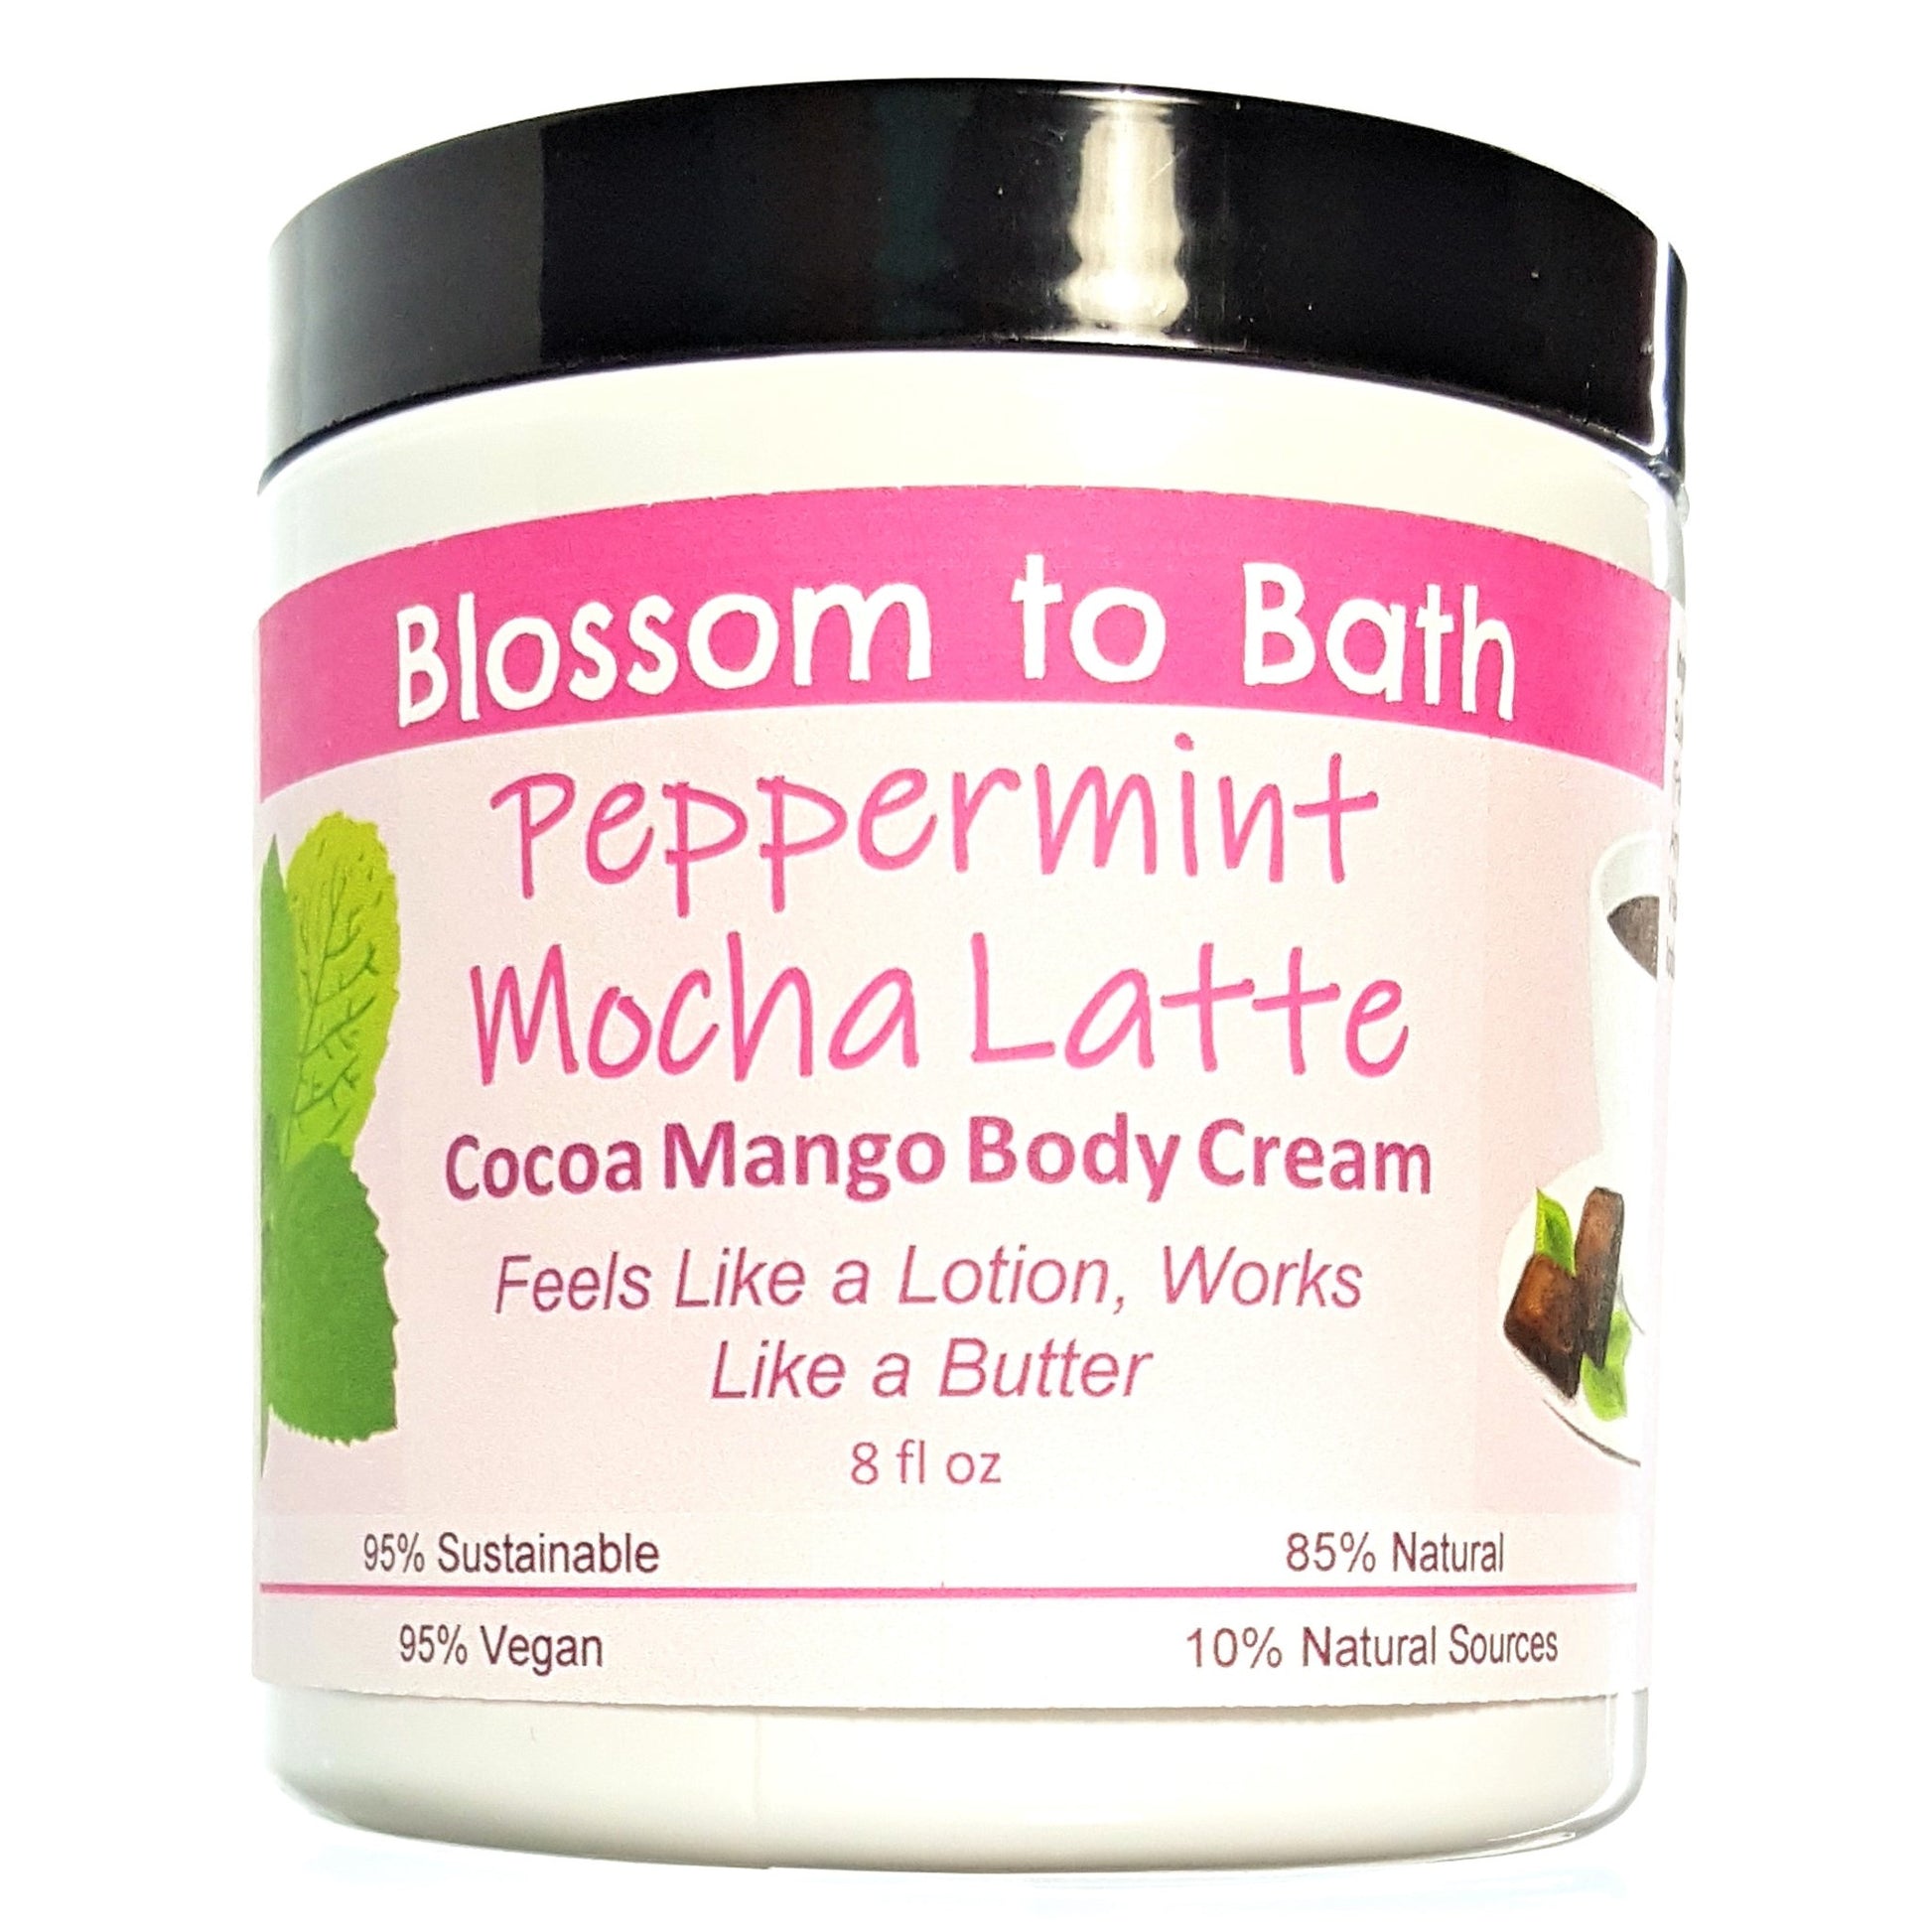 Buy Blossom to Bath Peppermint Mocha Latte Cocoa Mango Body Cream from Flowersong Soap Studio.  Rich organic butters  soften and moisturize even the roughest skin all day  A confectionary blend of fresh mint, rich fudge, and coffee.